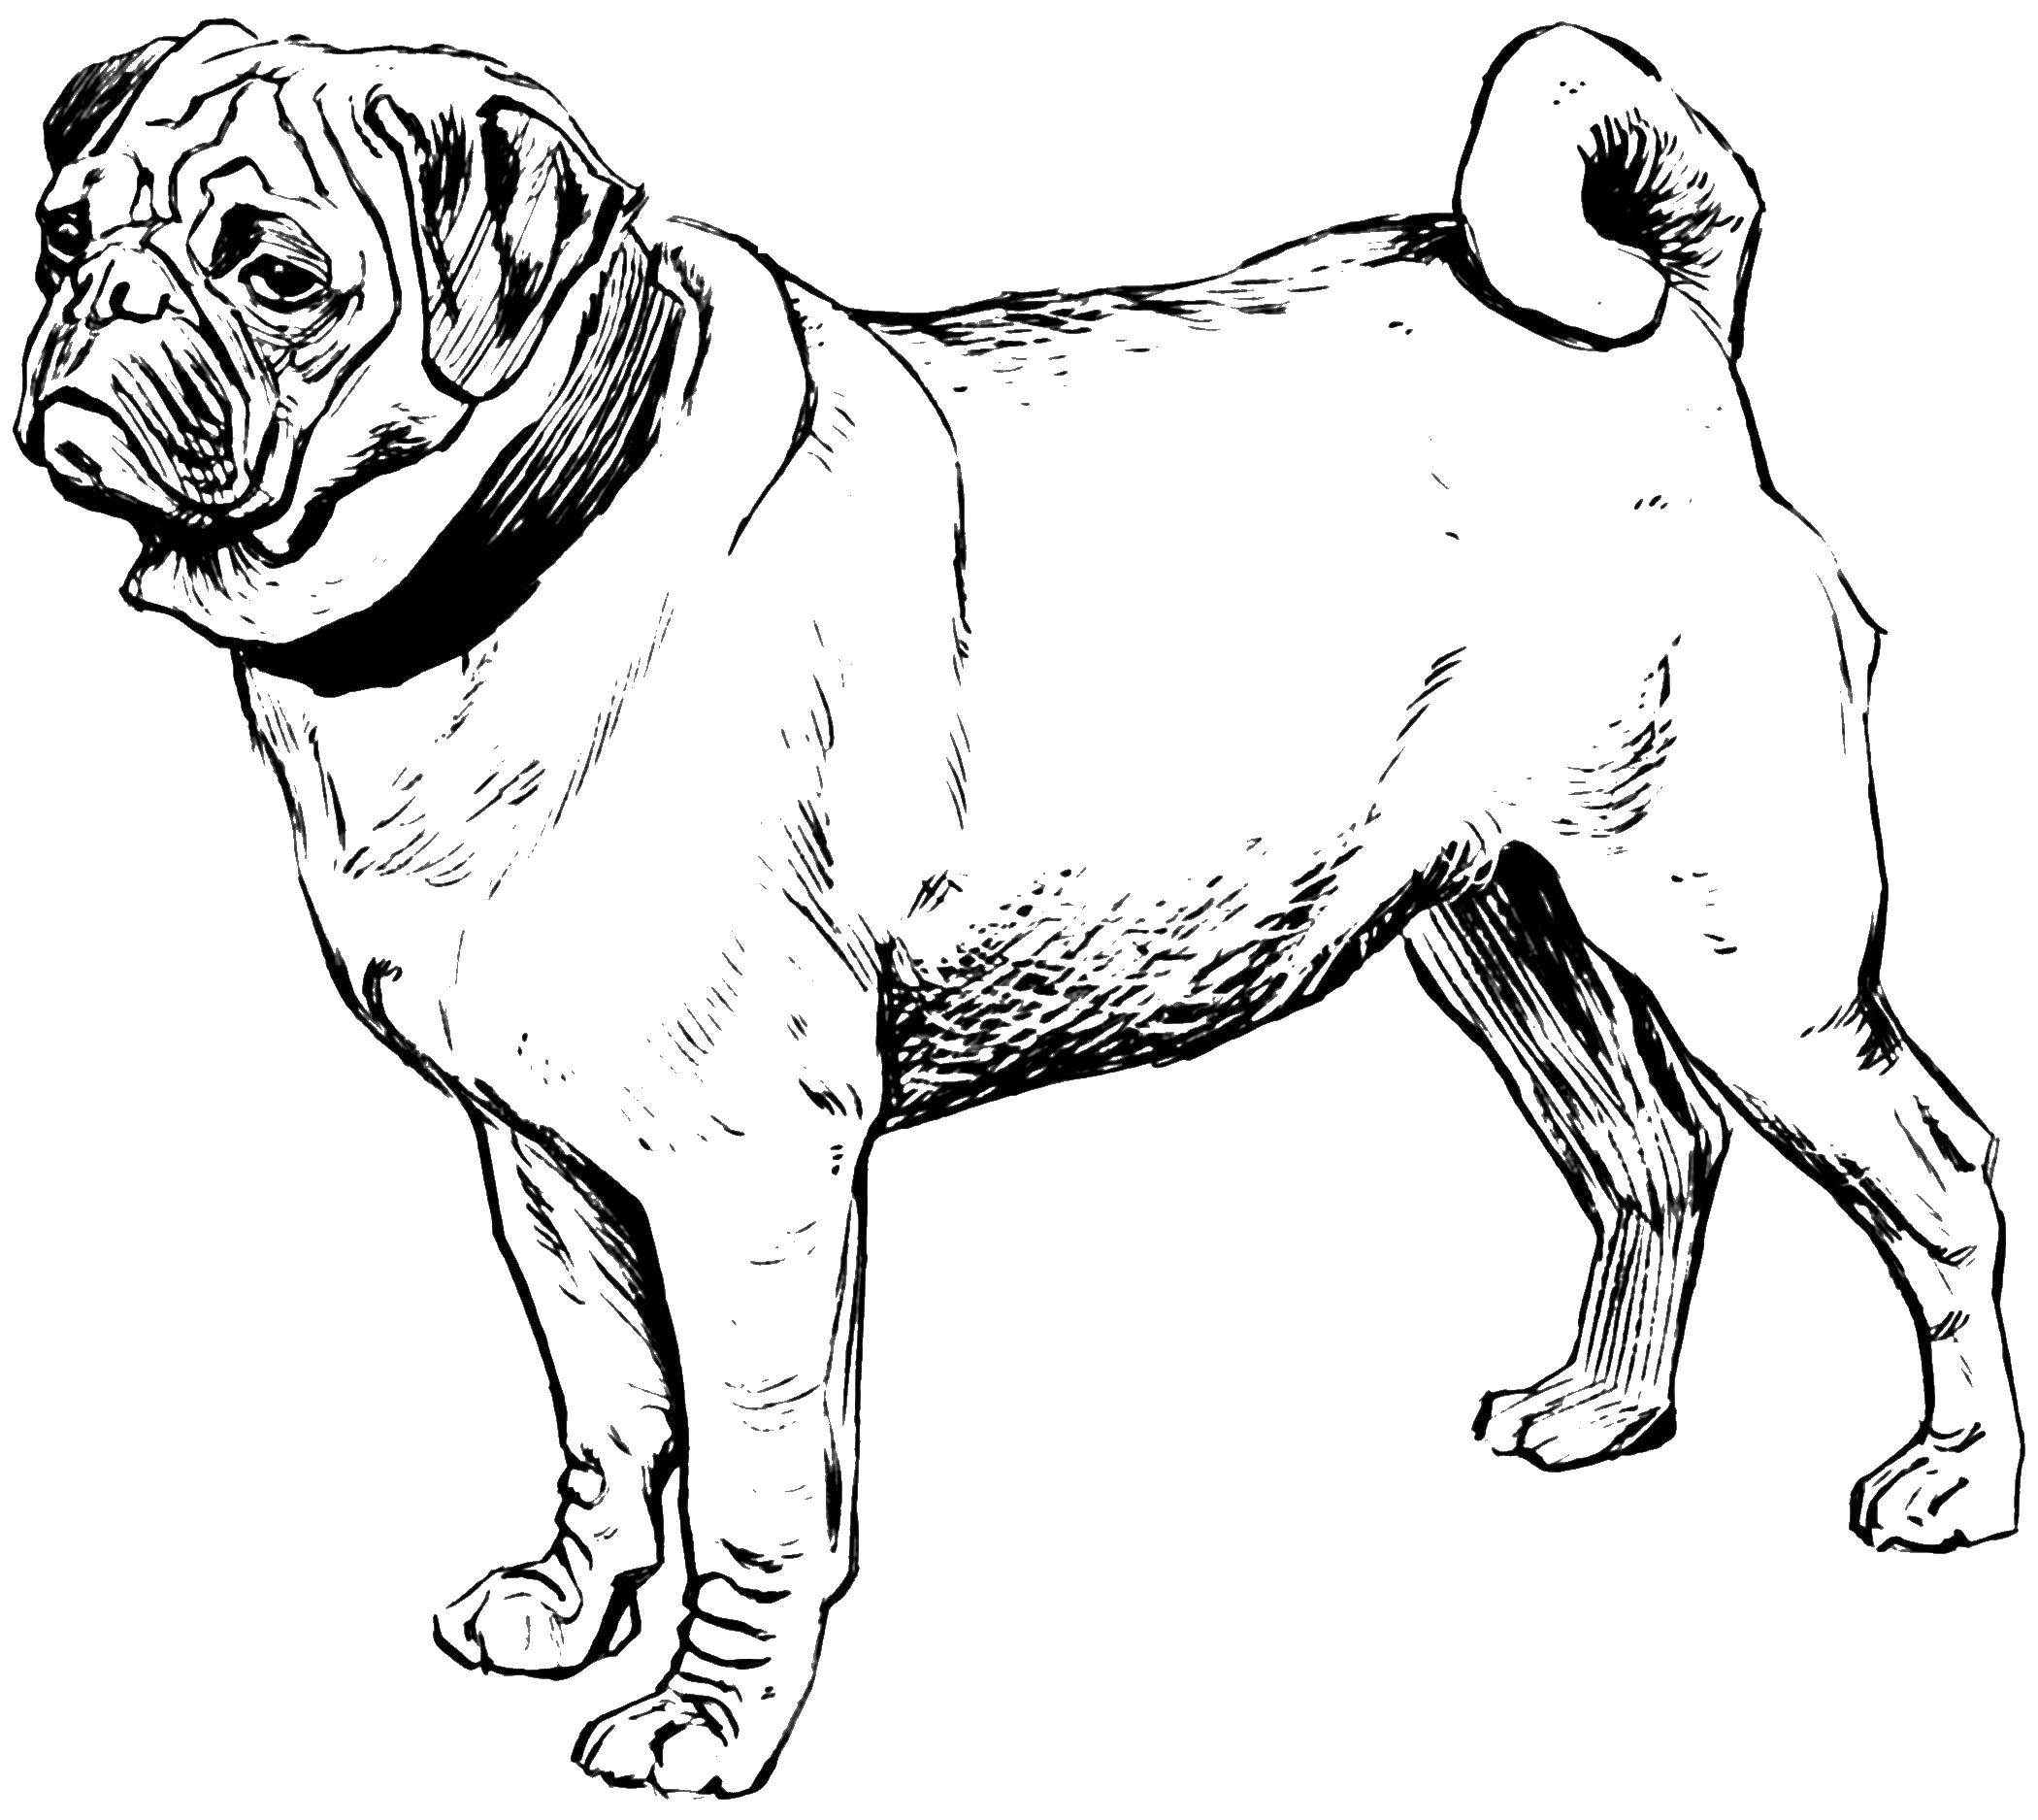 Coloring Pug. Category dogs. Tags:  pug.